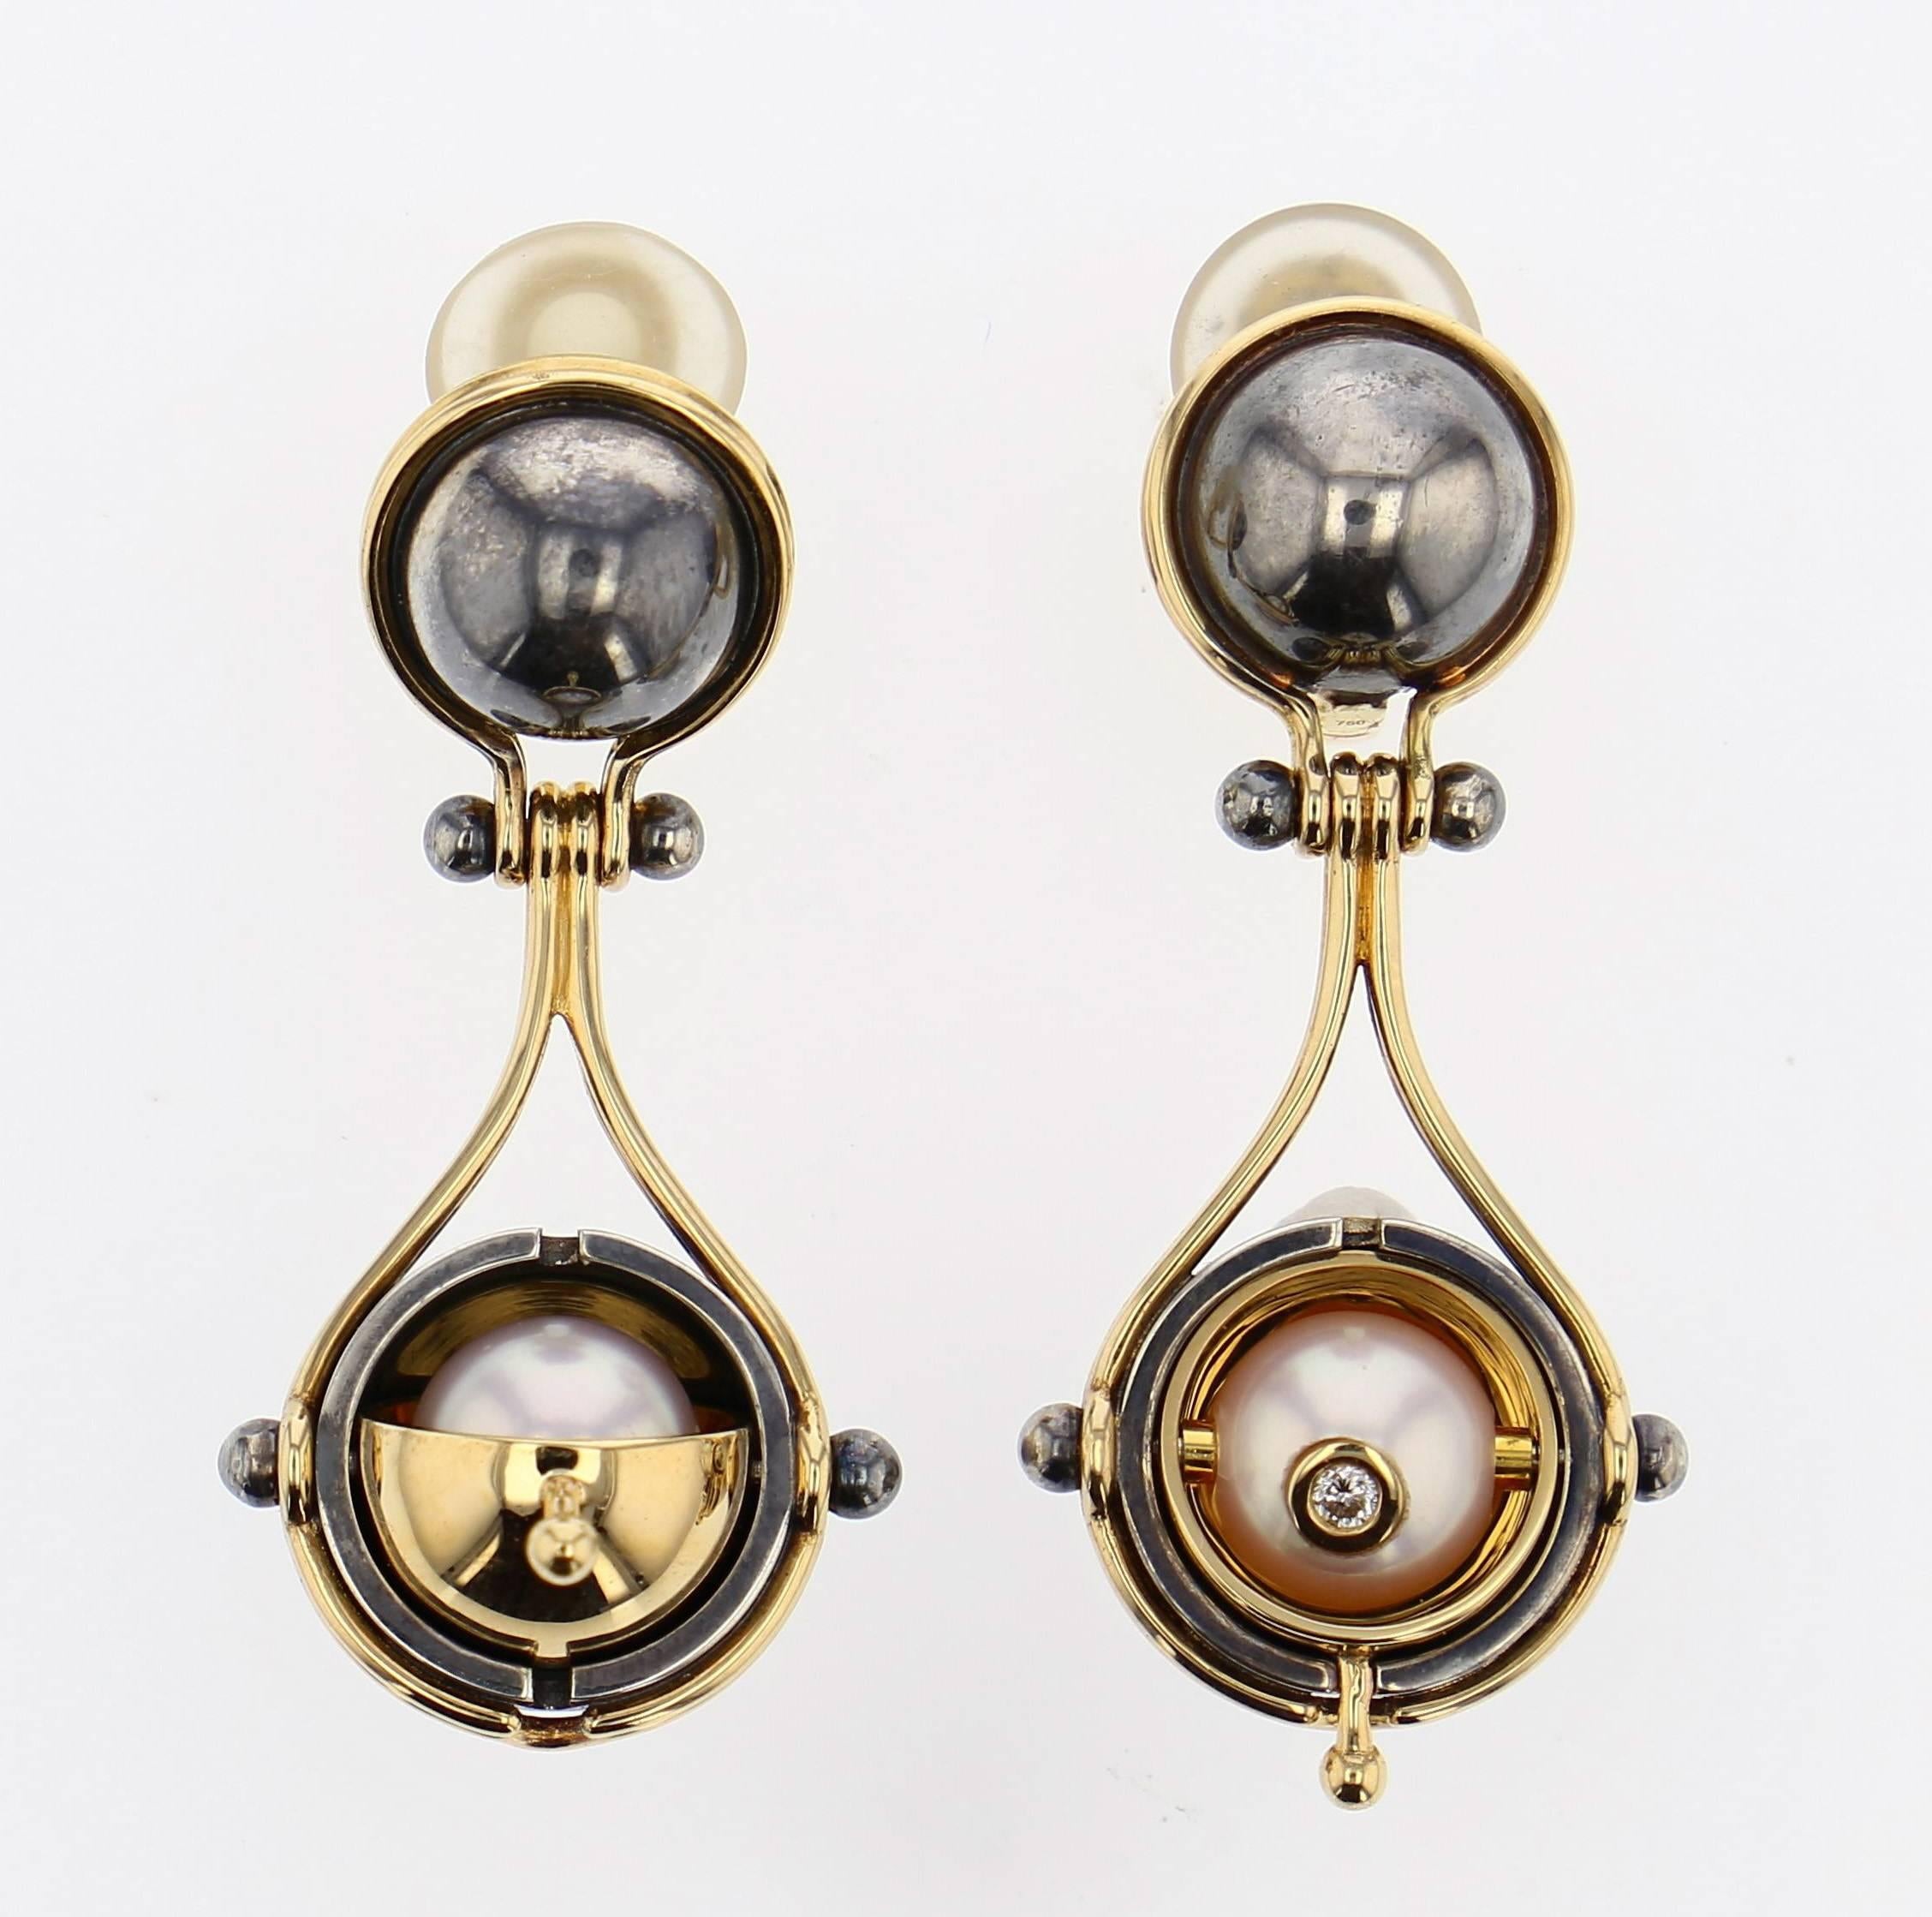 Earrings Pluton Yellow Gold Akoya Pearl Diamonds

Dangly clip-on earrings comprising two yellow gold threads around a patinated silver globe level with the ear. This supports a patinated silver mobile structure, on which a rotating yellow gold